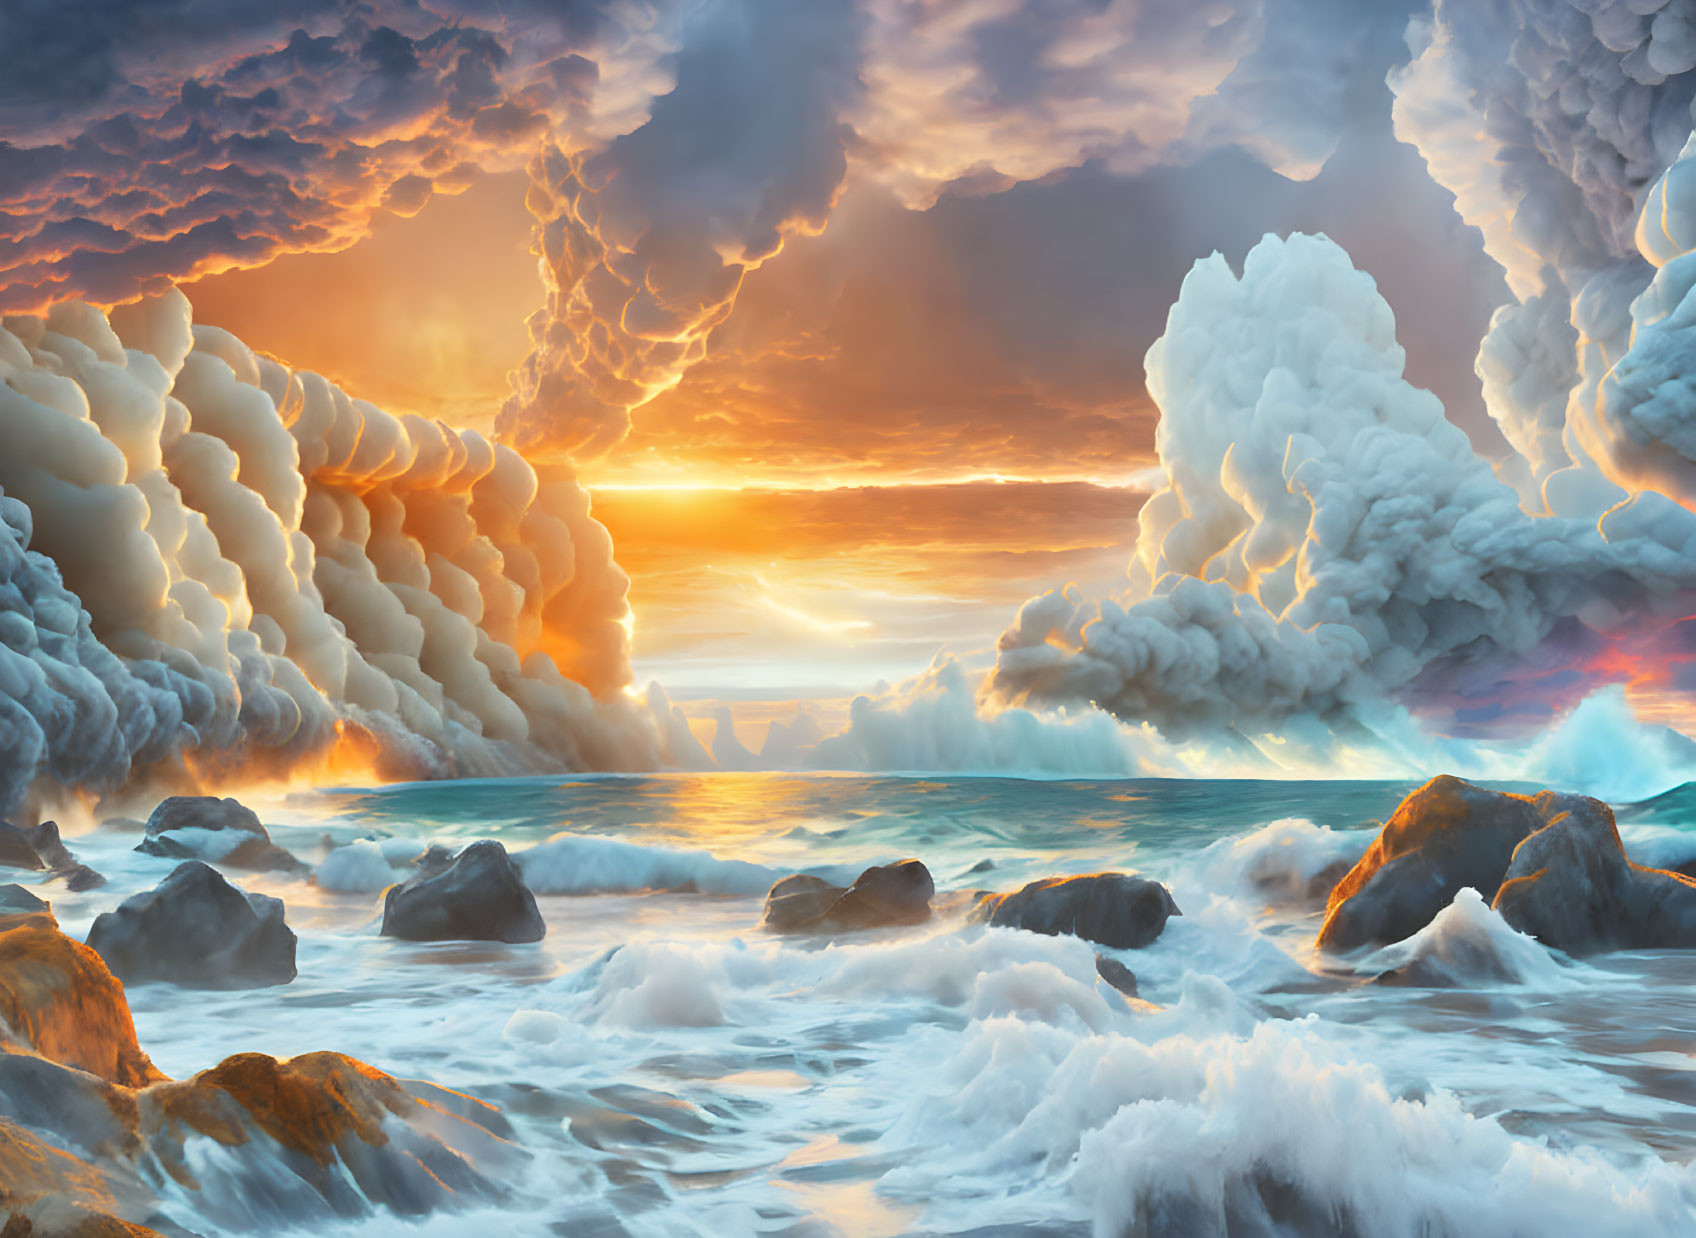 Fiery sunset over turbulent ocean with billowing clouds